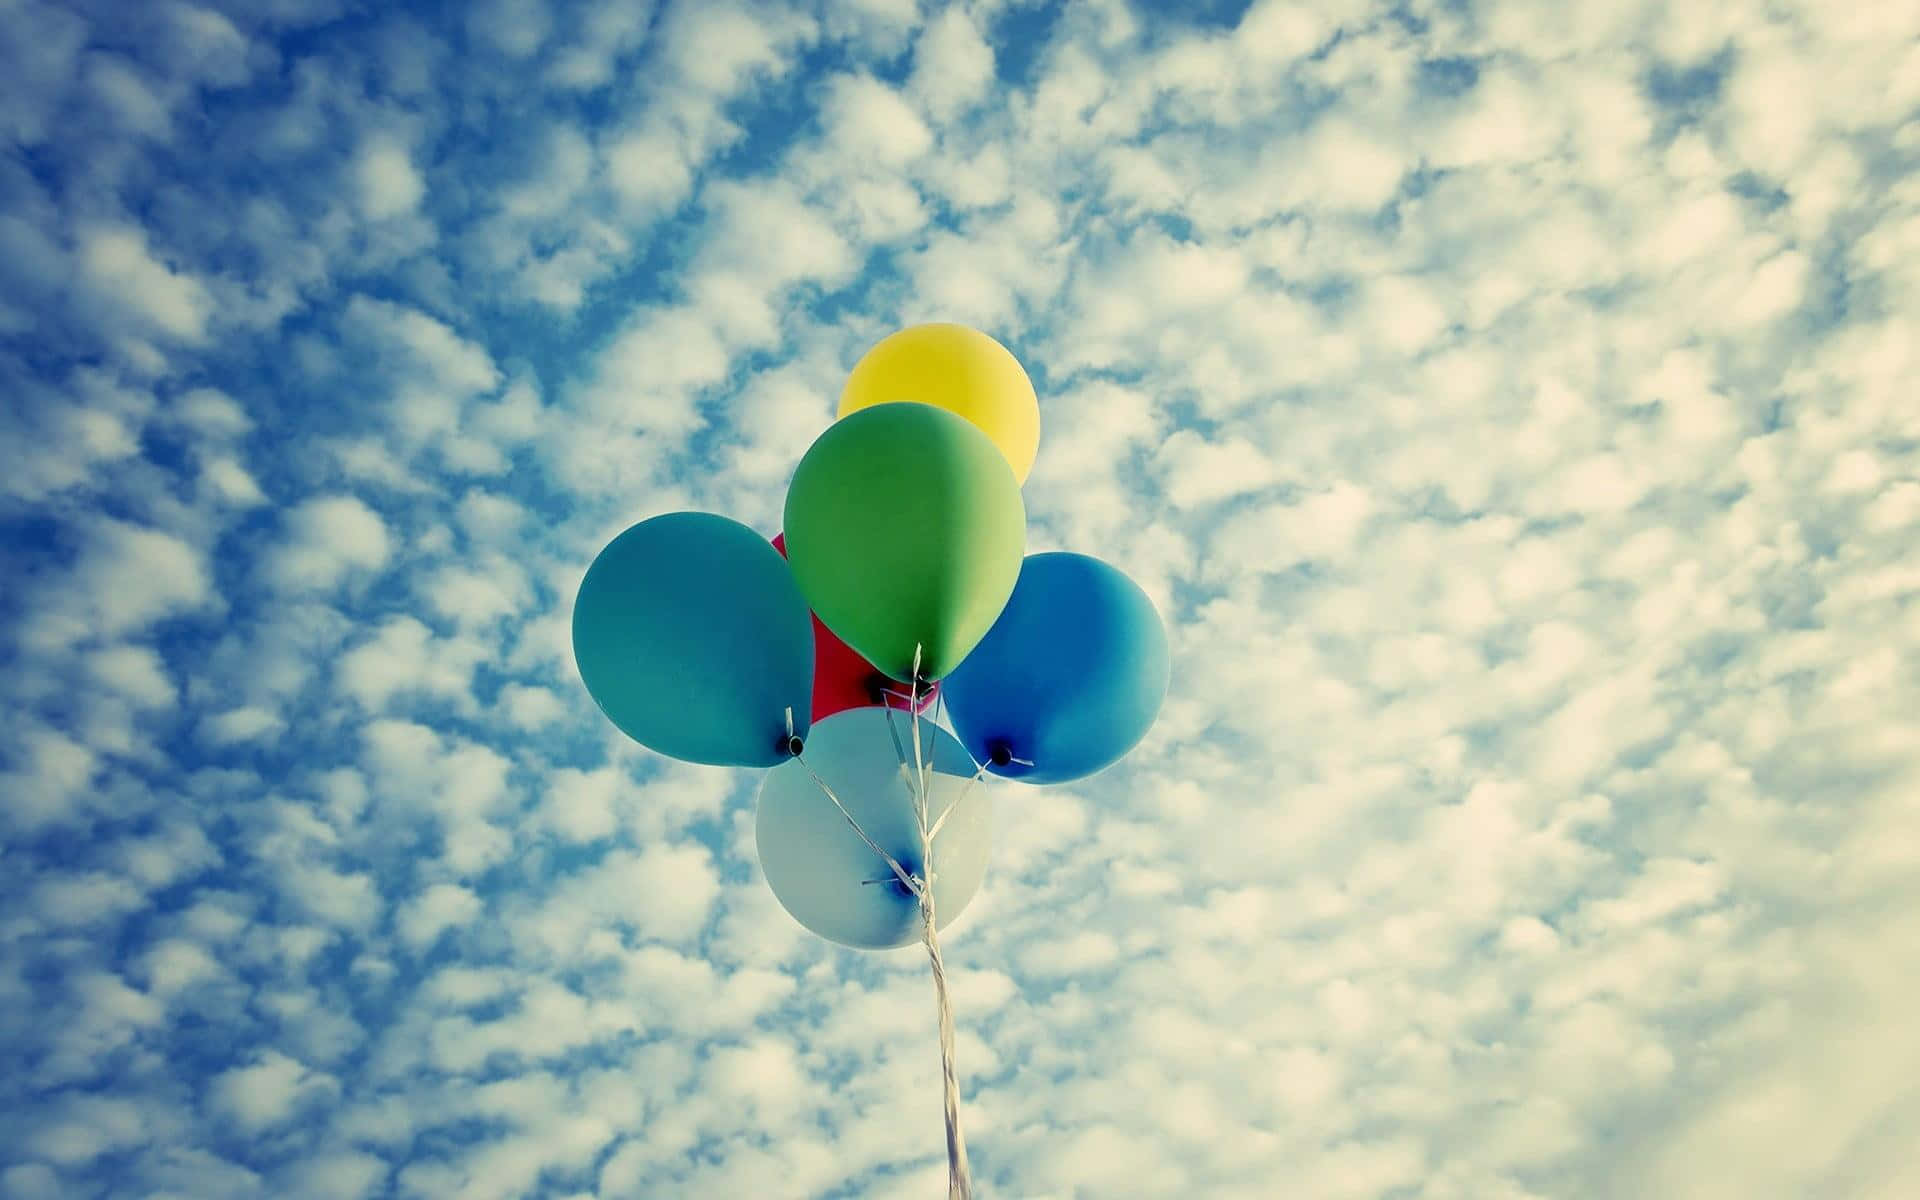 Bright colorful balloons filling the sky